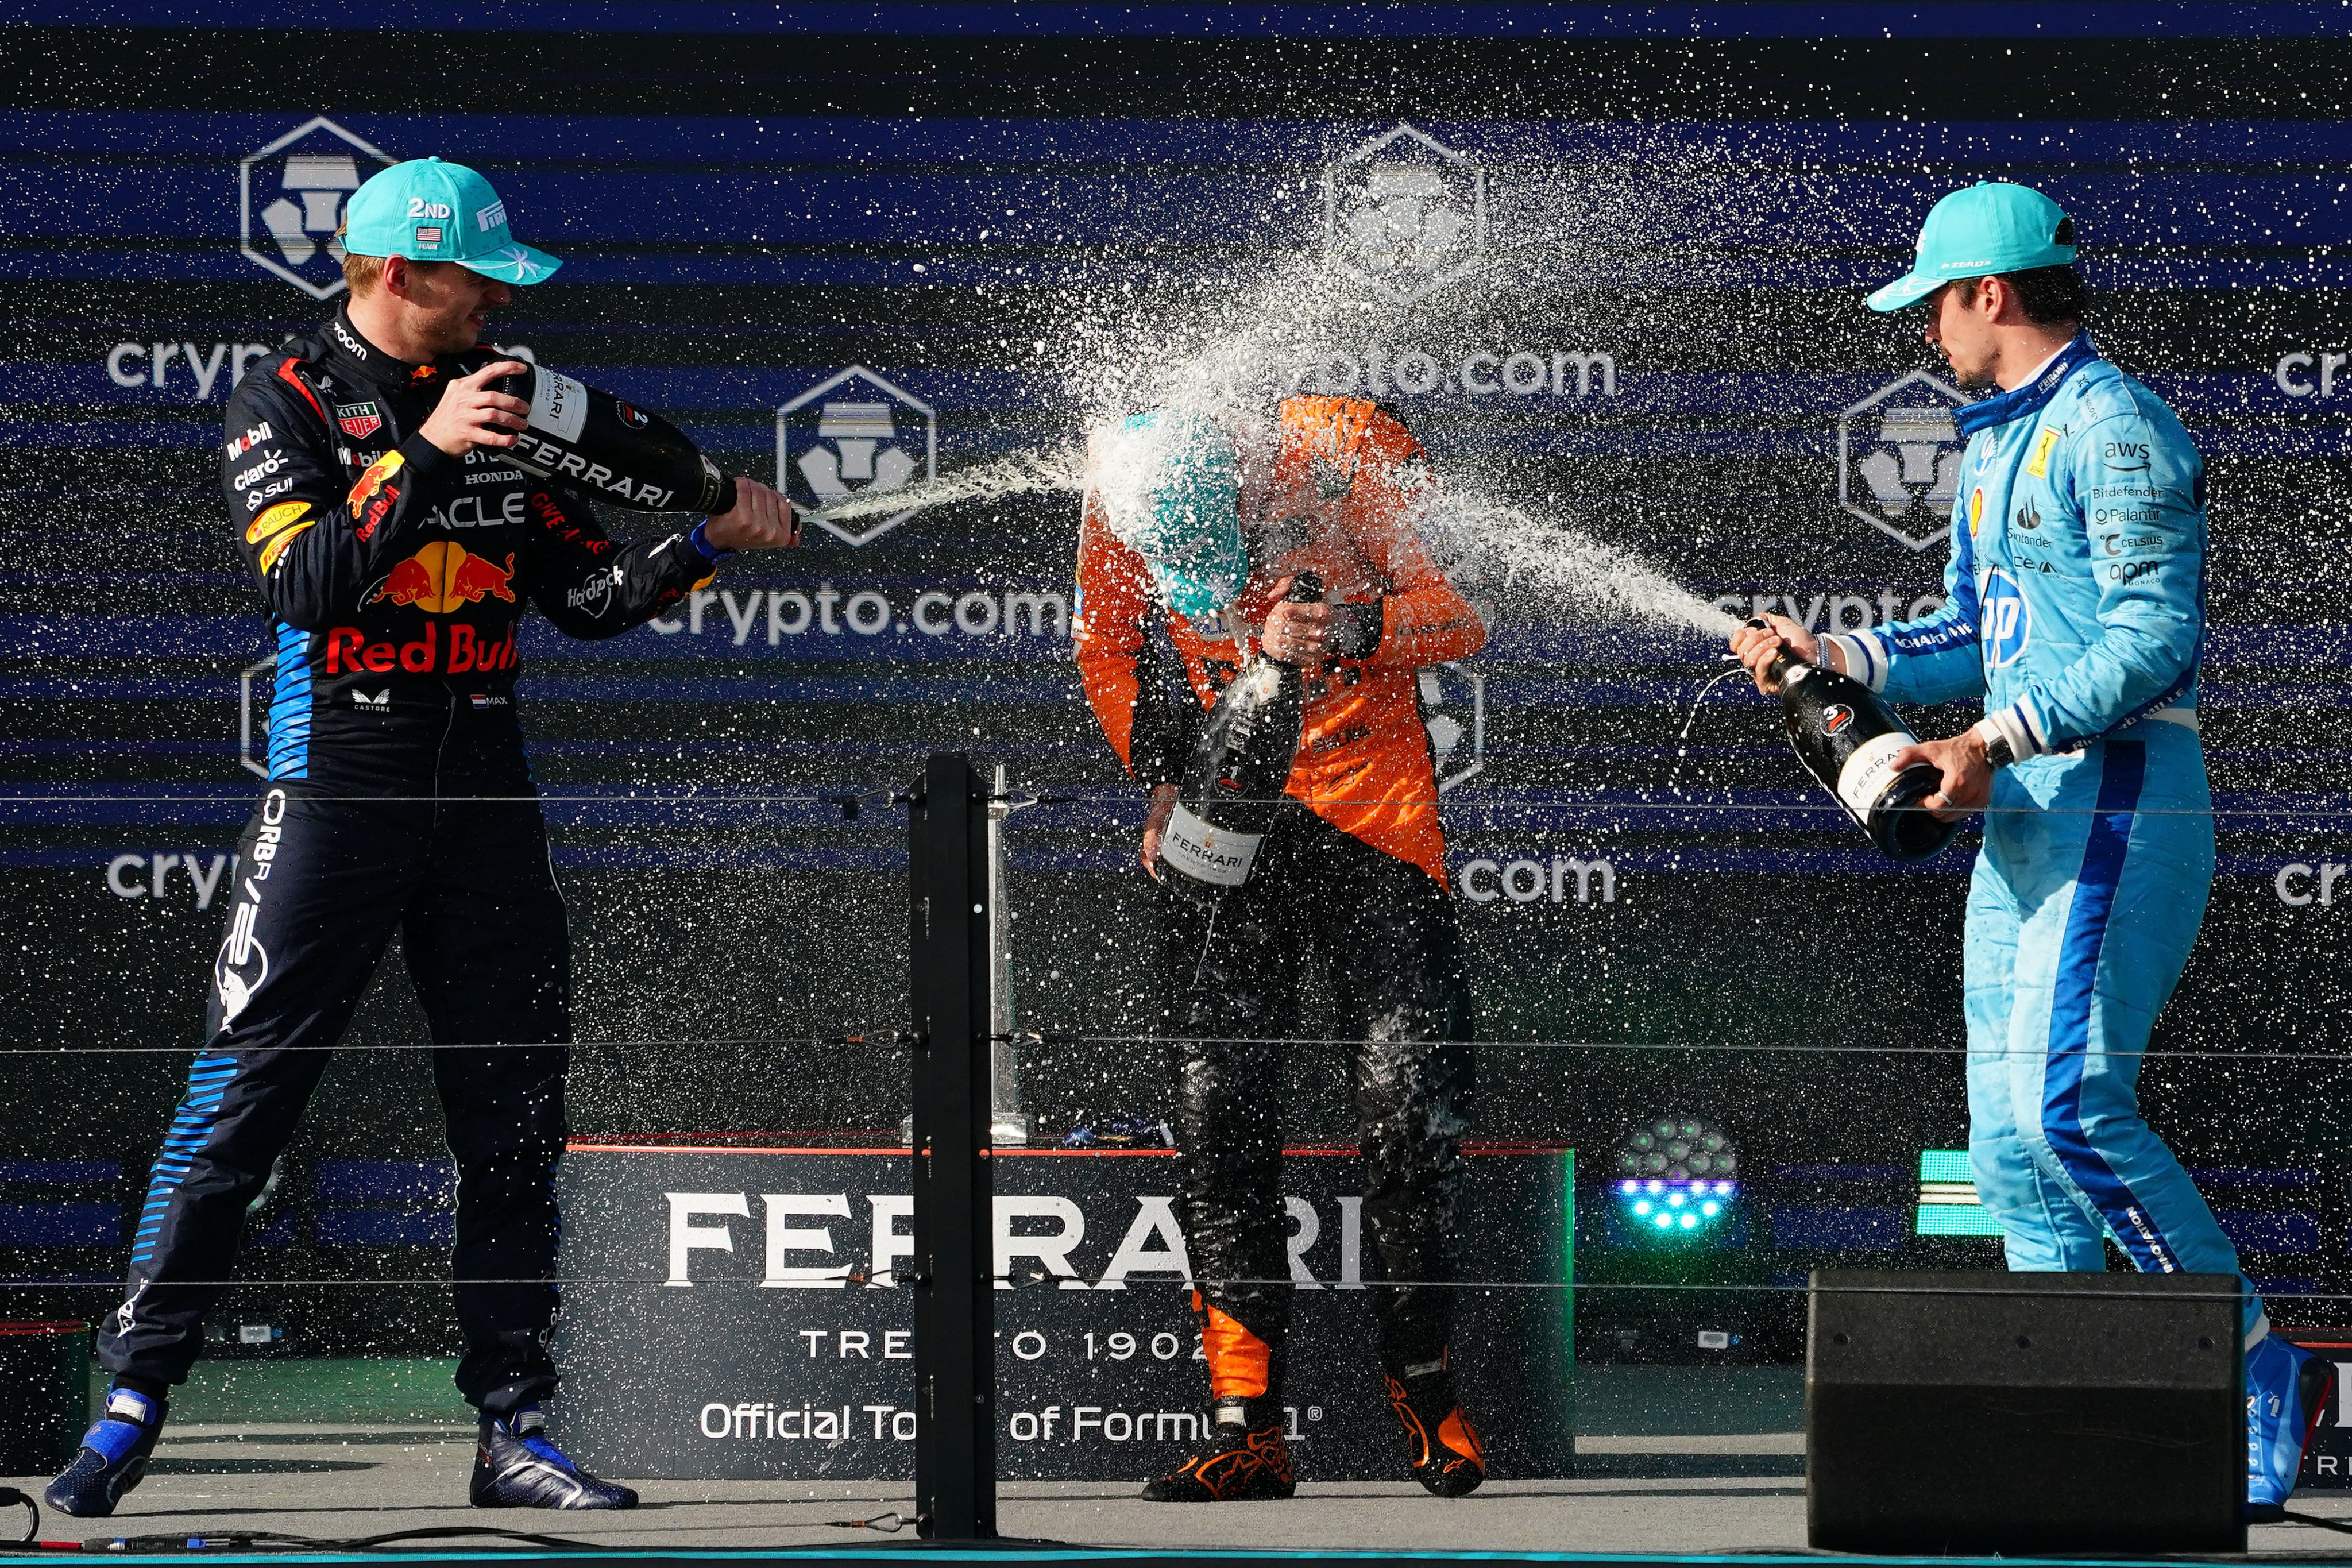 Max Verstappen (left) and Charles Leclerc (right) spray champagne on race winner Lando Norris after his maiden victory. Photo: USA TODAY Sports